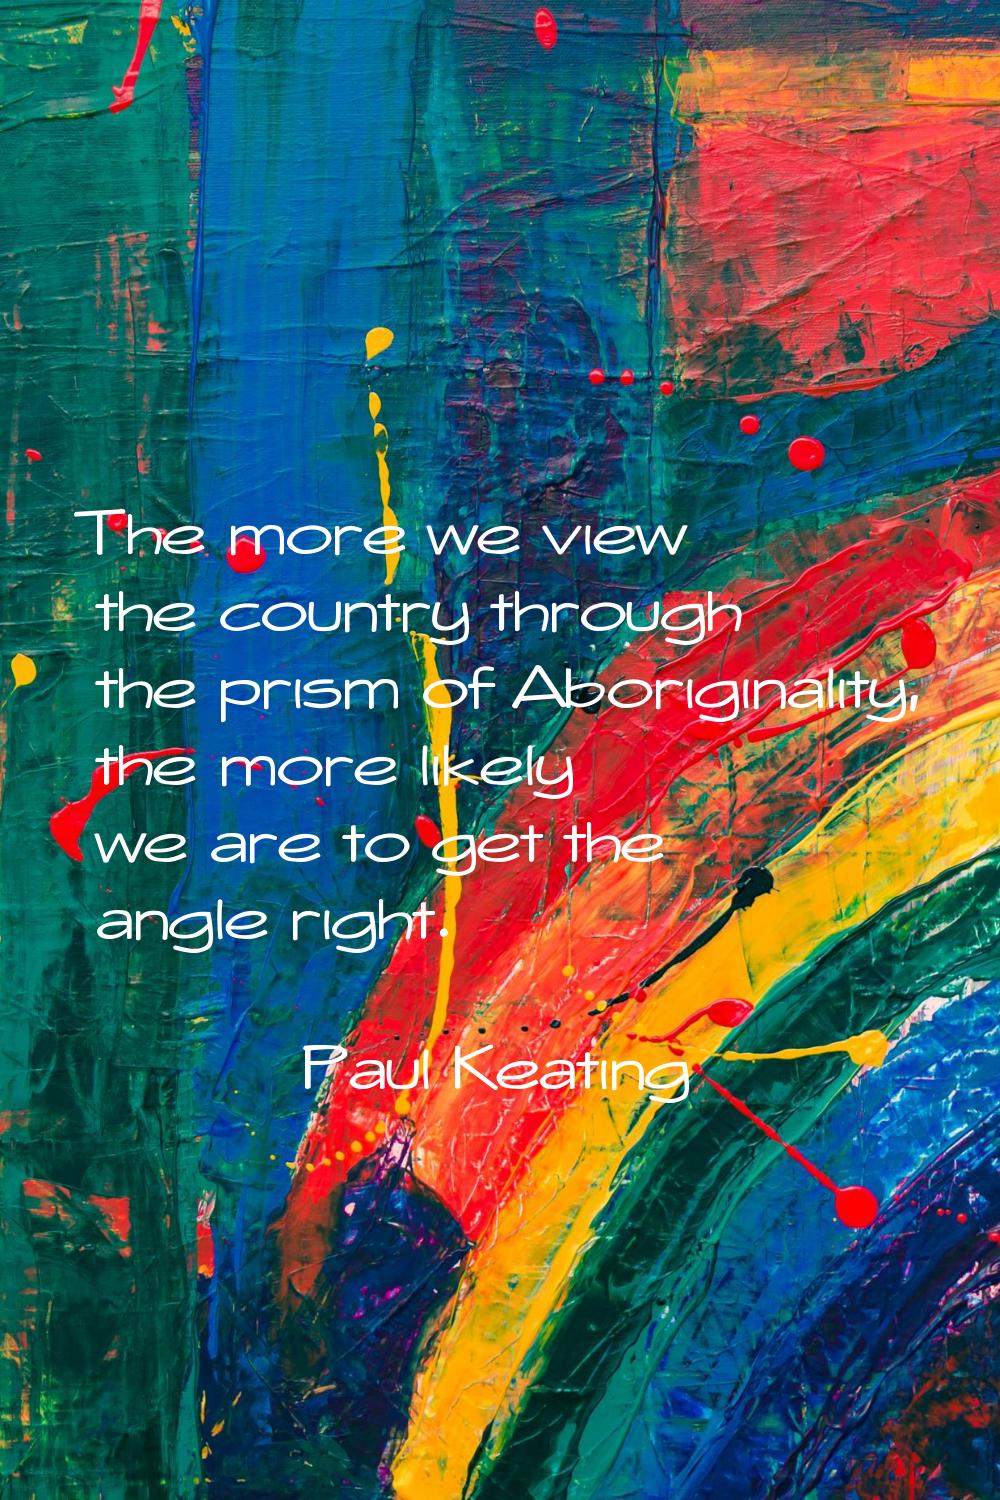 The more we view the country through the prism of Aboriginality, the more likely we are to get the 